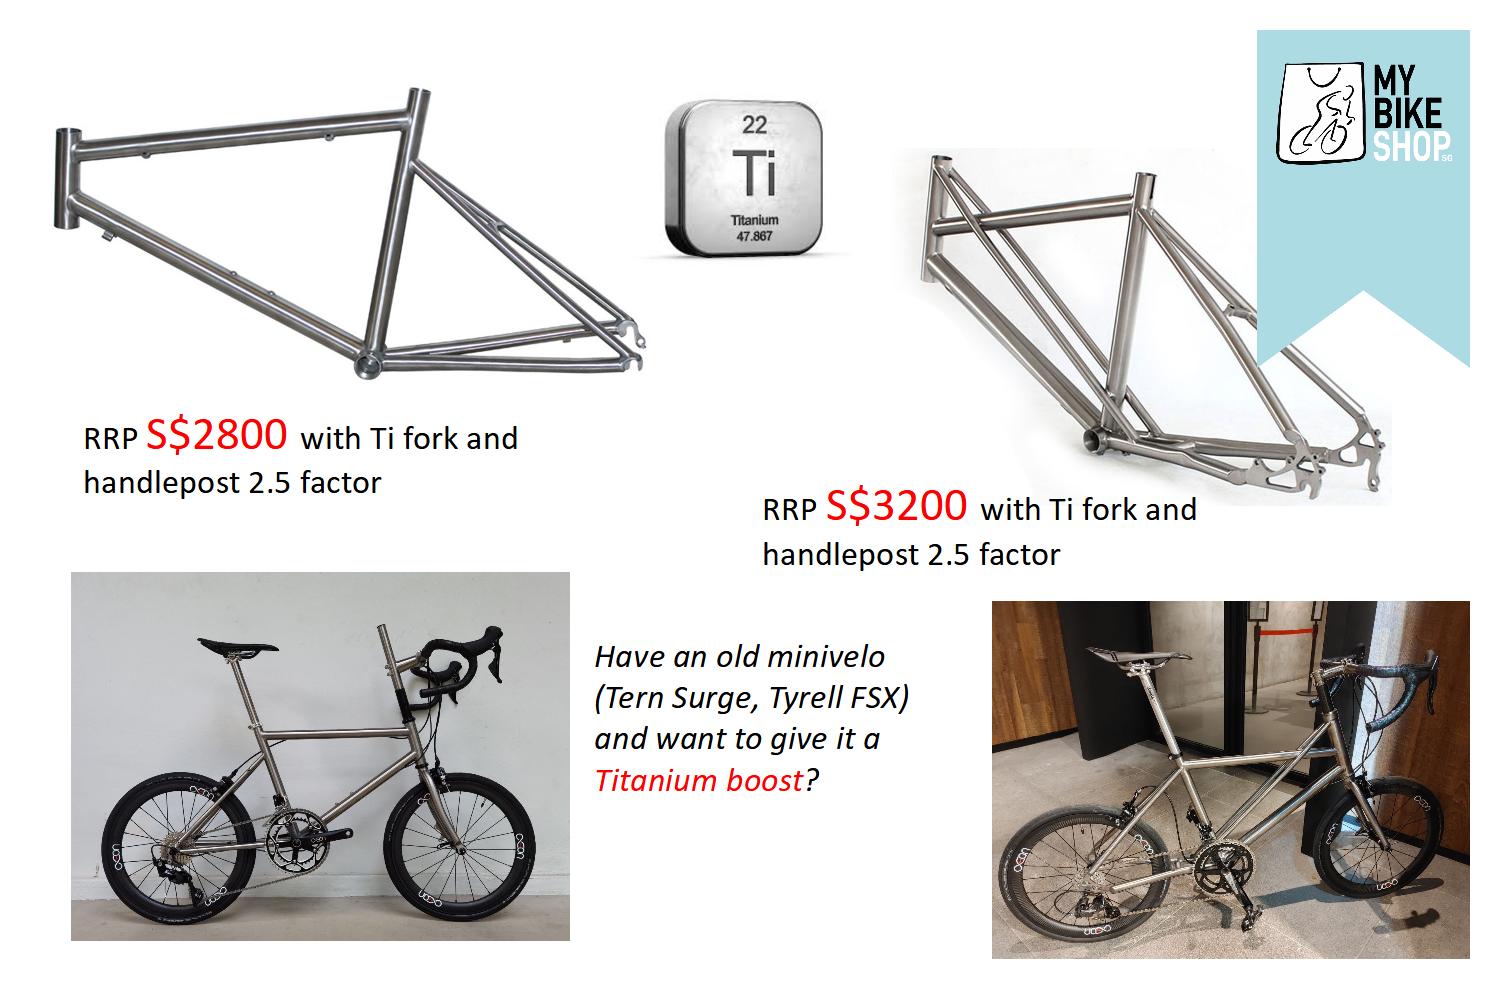 Framesets to build your own dream machine